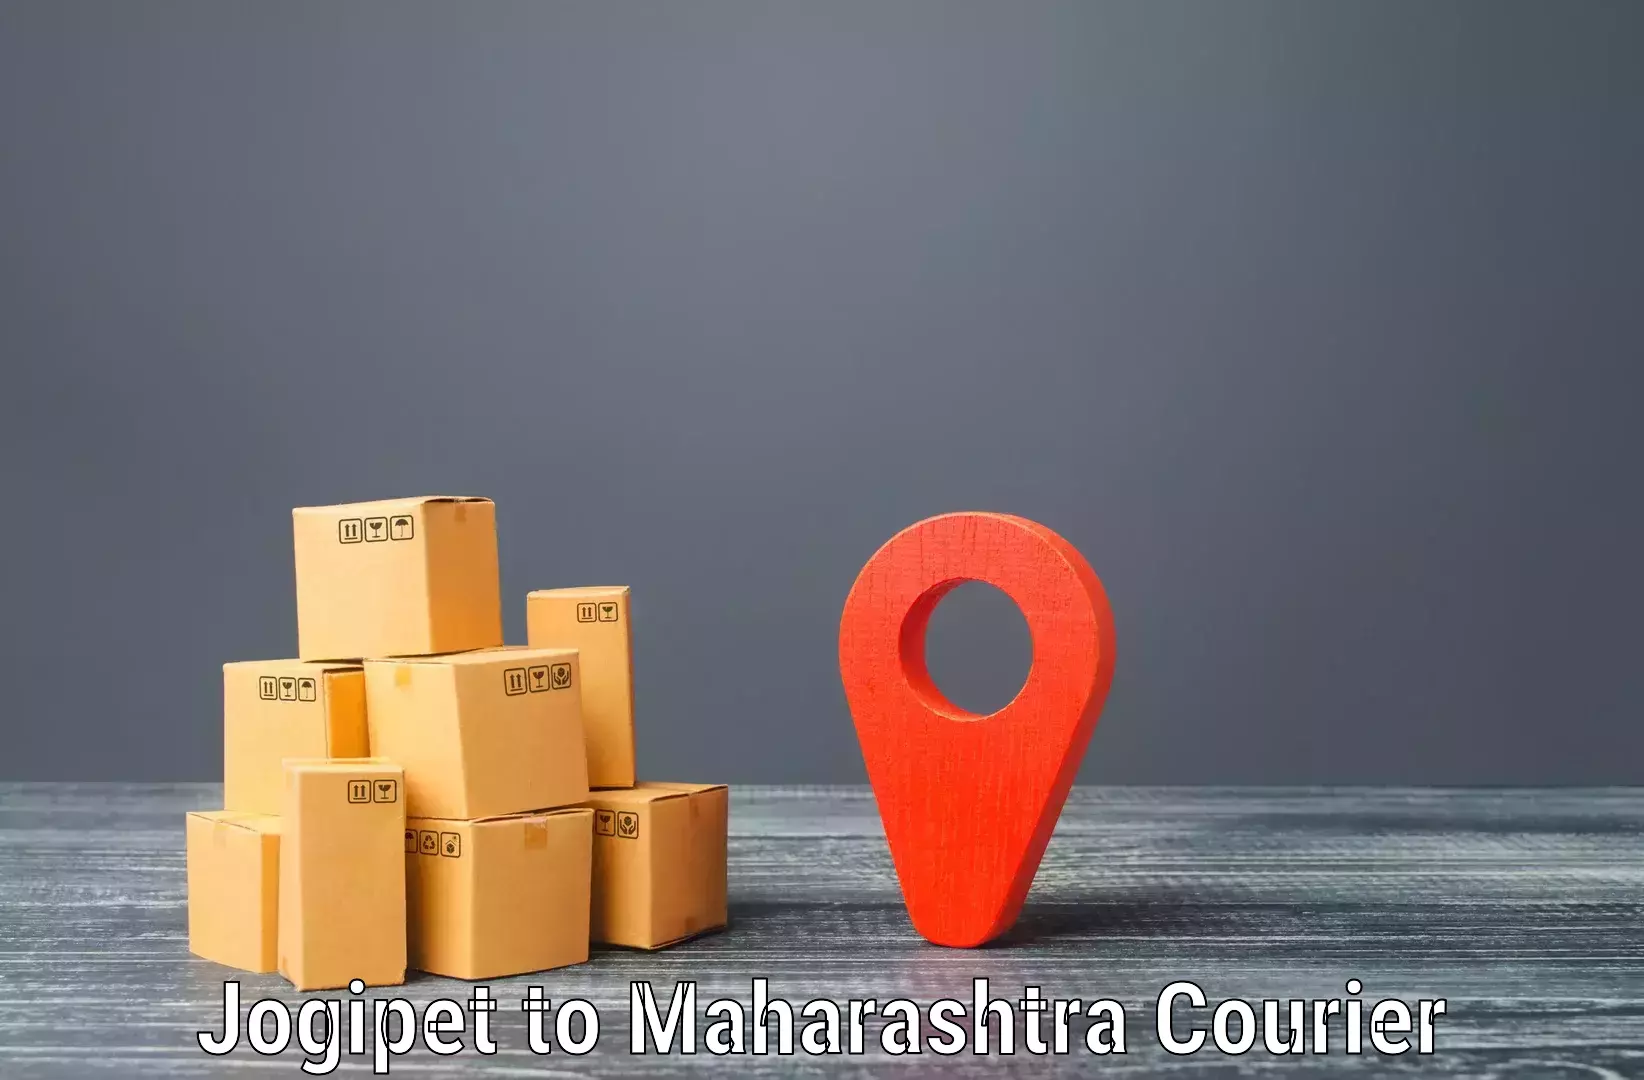 Quality courier services Jogipet to Chalisgaon